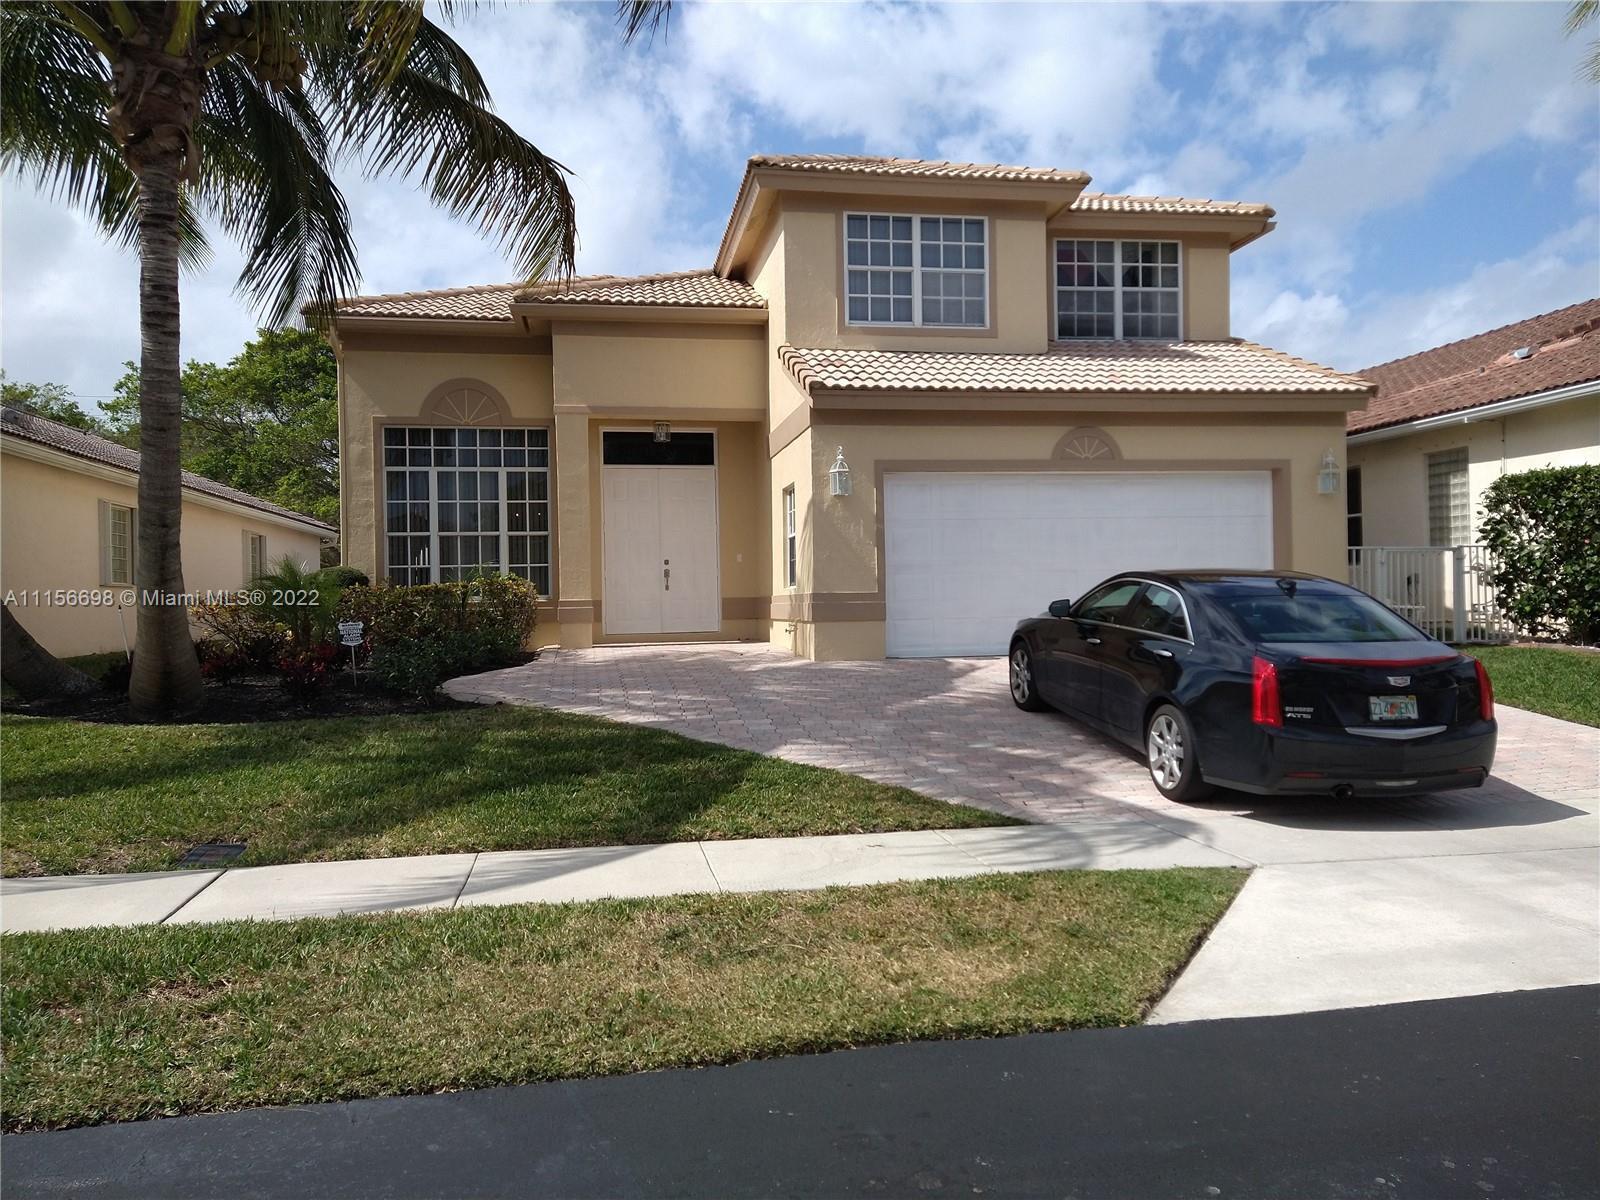 Beautiful former model home in the exclusive gated community of Boca Preserve. 4 bedroom 2 1/2 bath,